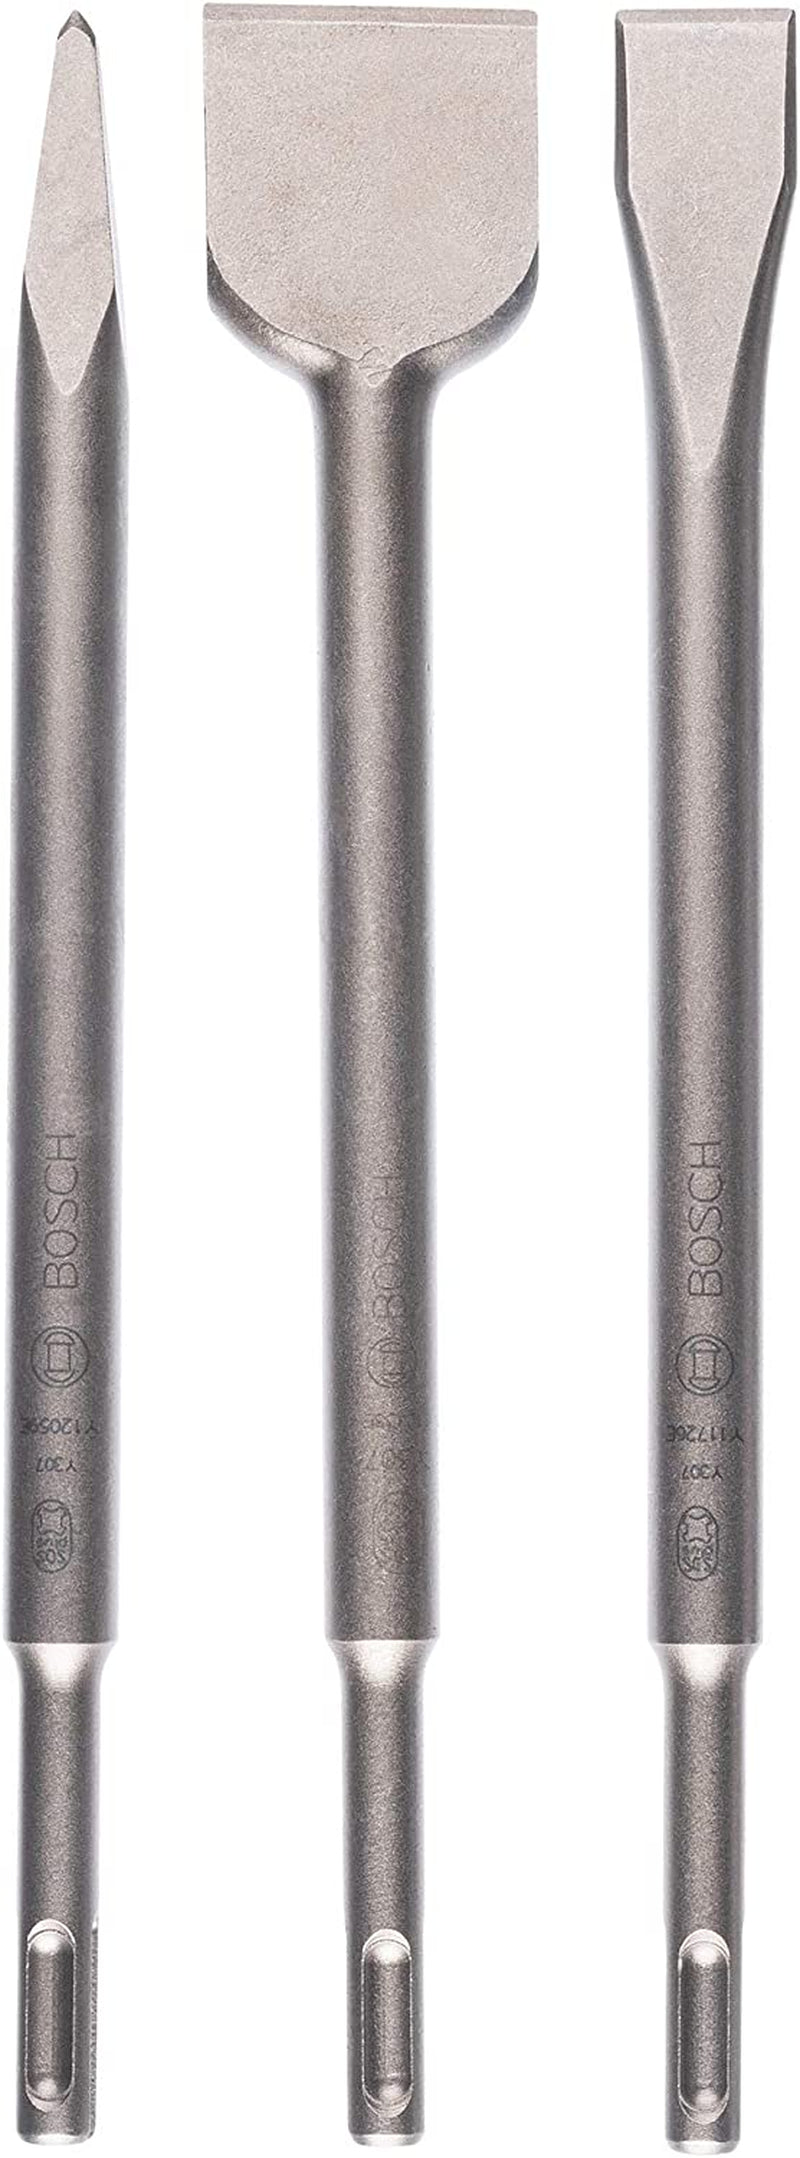 Bosch 3-Piece Chisel Set SDS plus (Concrete, Masonry, Pointed, 20 Mm, 40 Mm, Accessories for Ligt Rotary, Demolition Hammers)